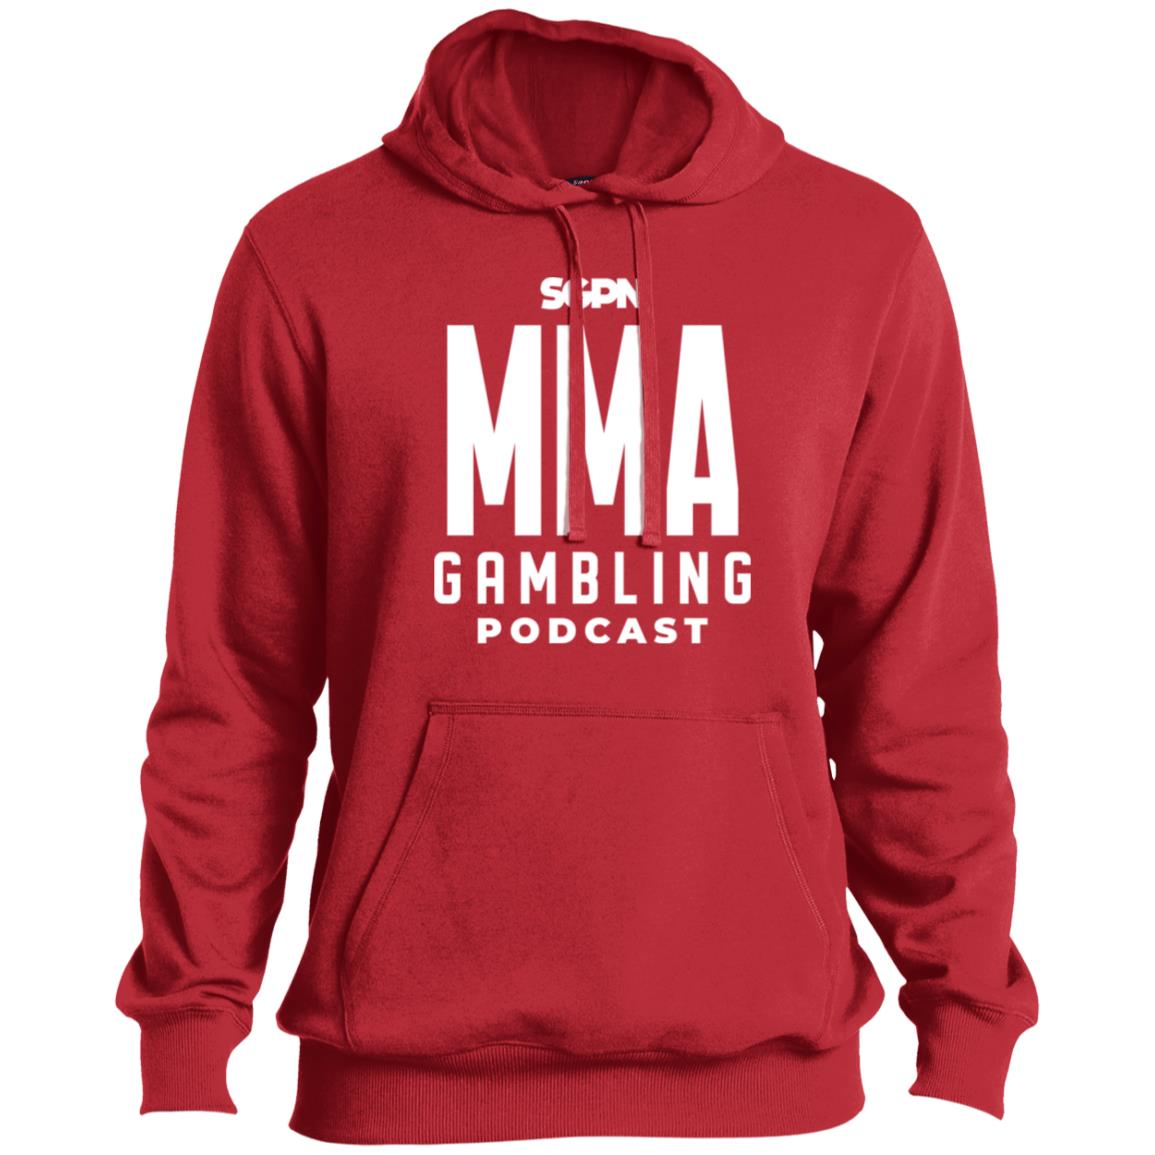 MMA Gambling Podcast Pullover Hoodie (White Logo)